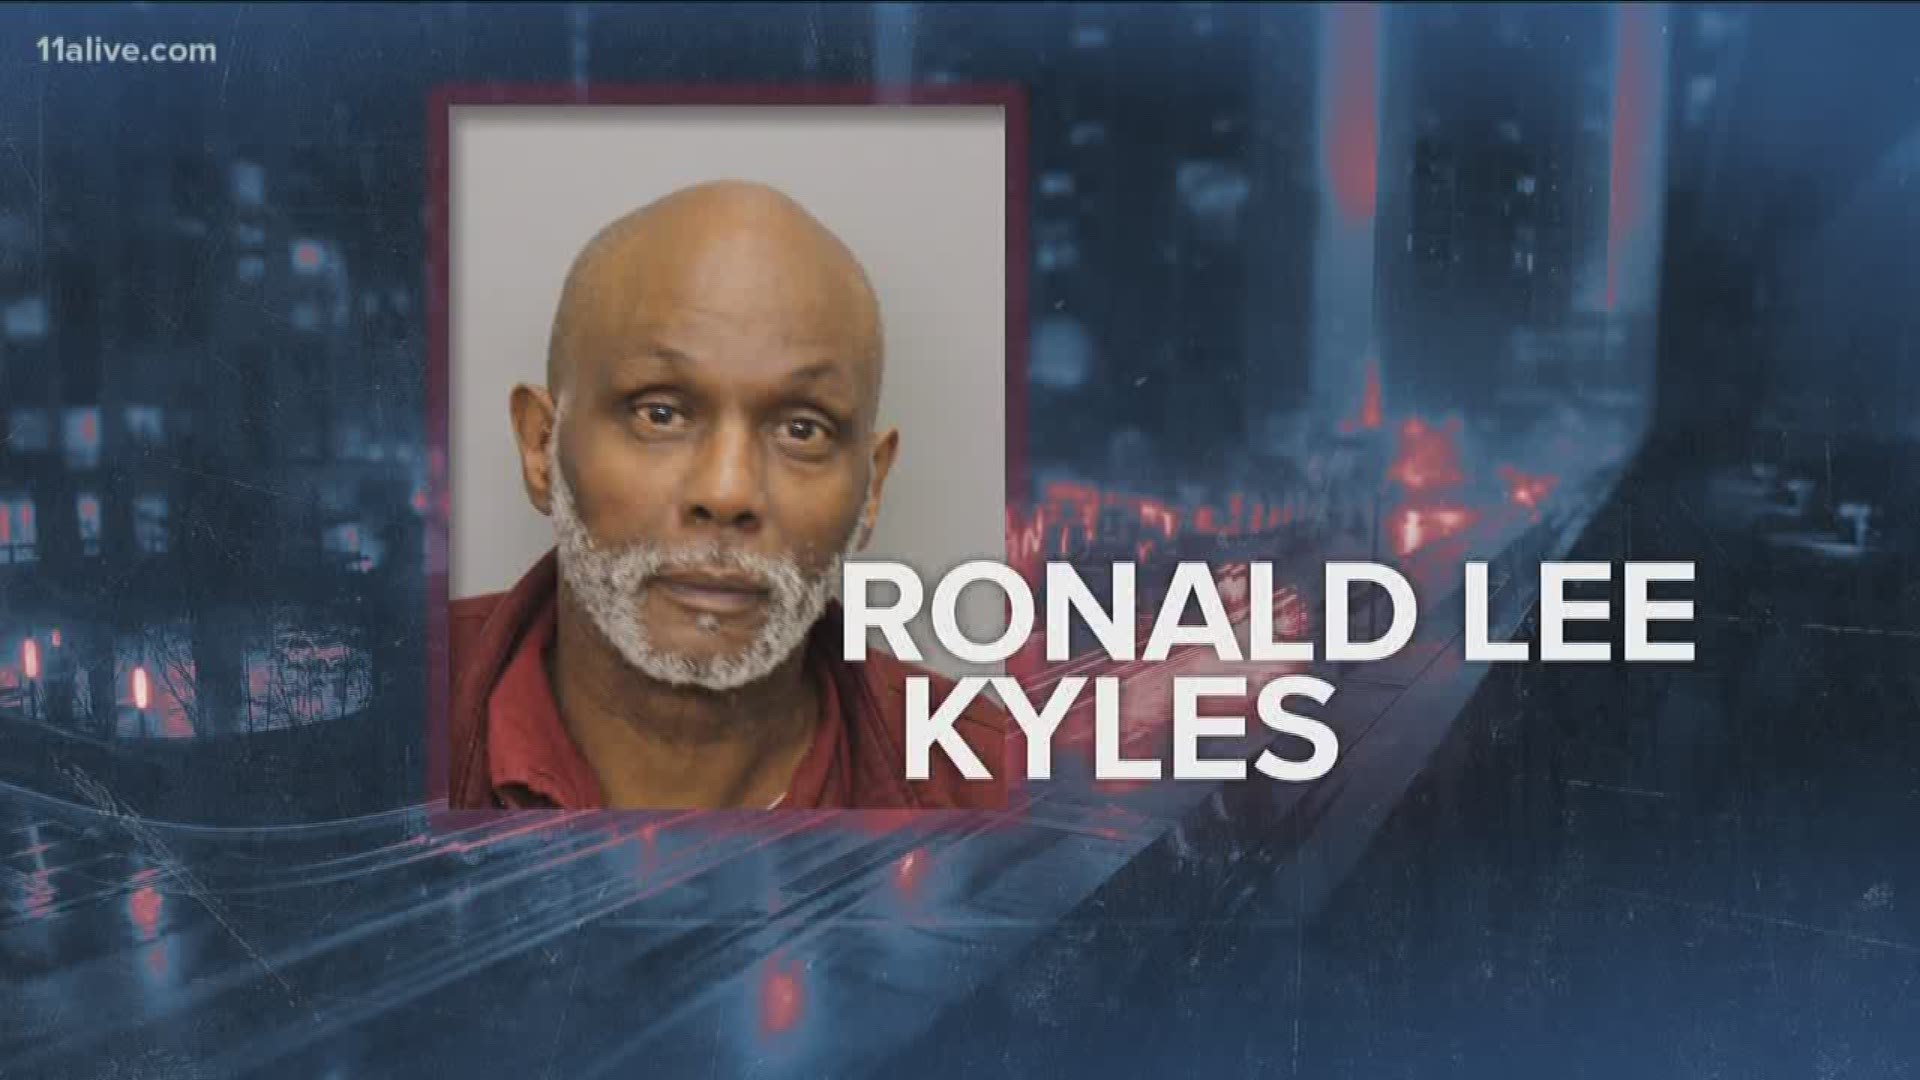 Ronald Lee Kyles was give two life sentences. 